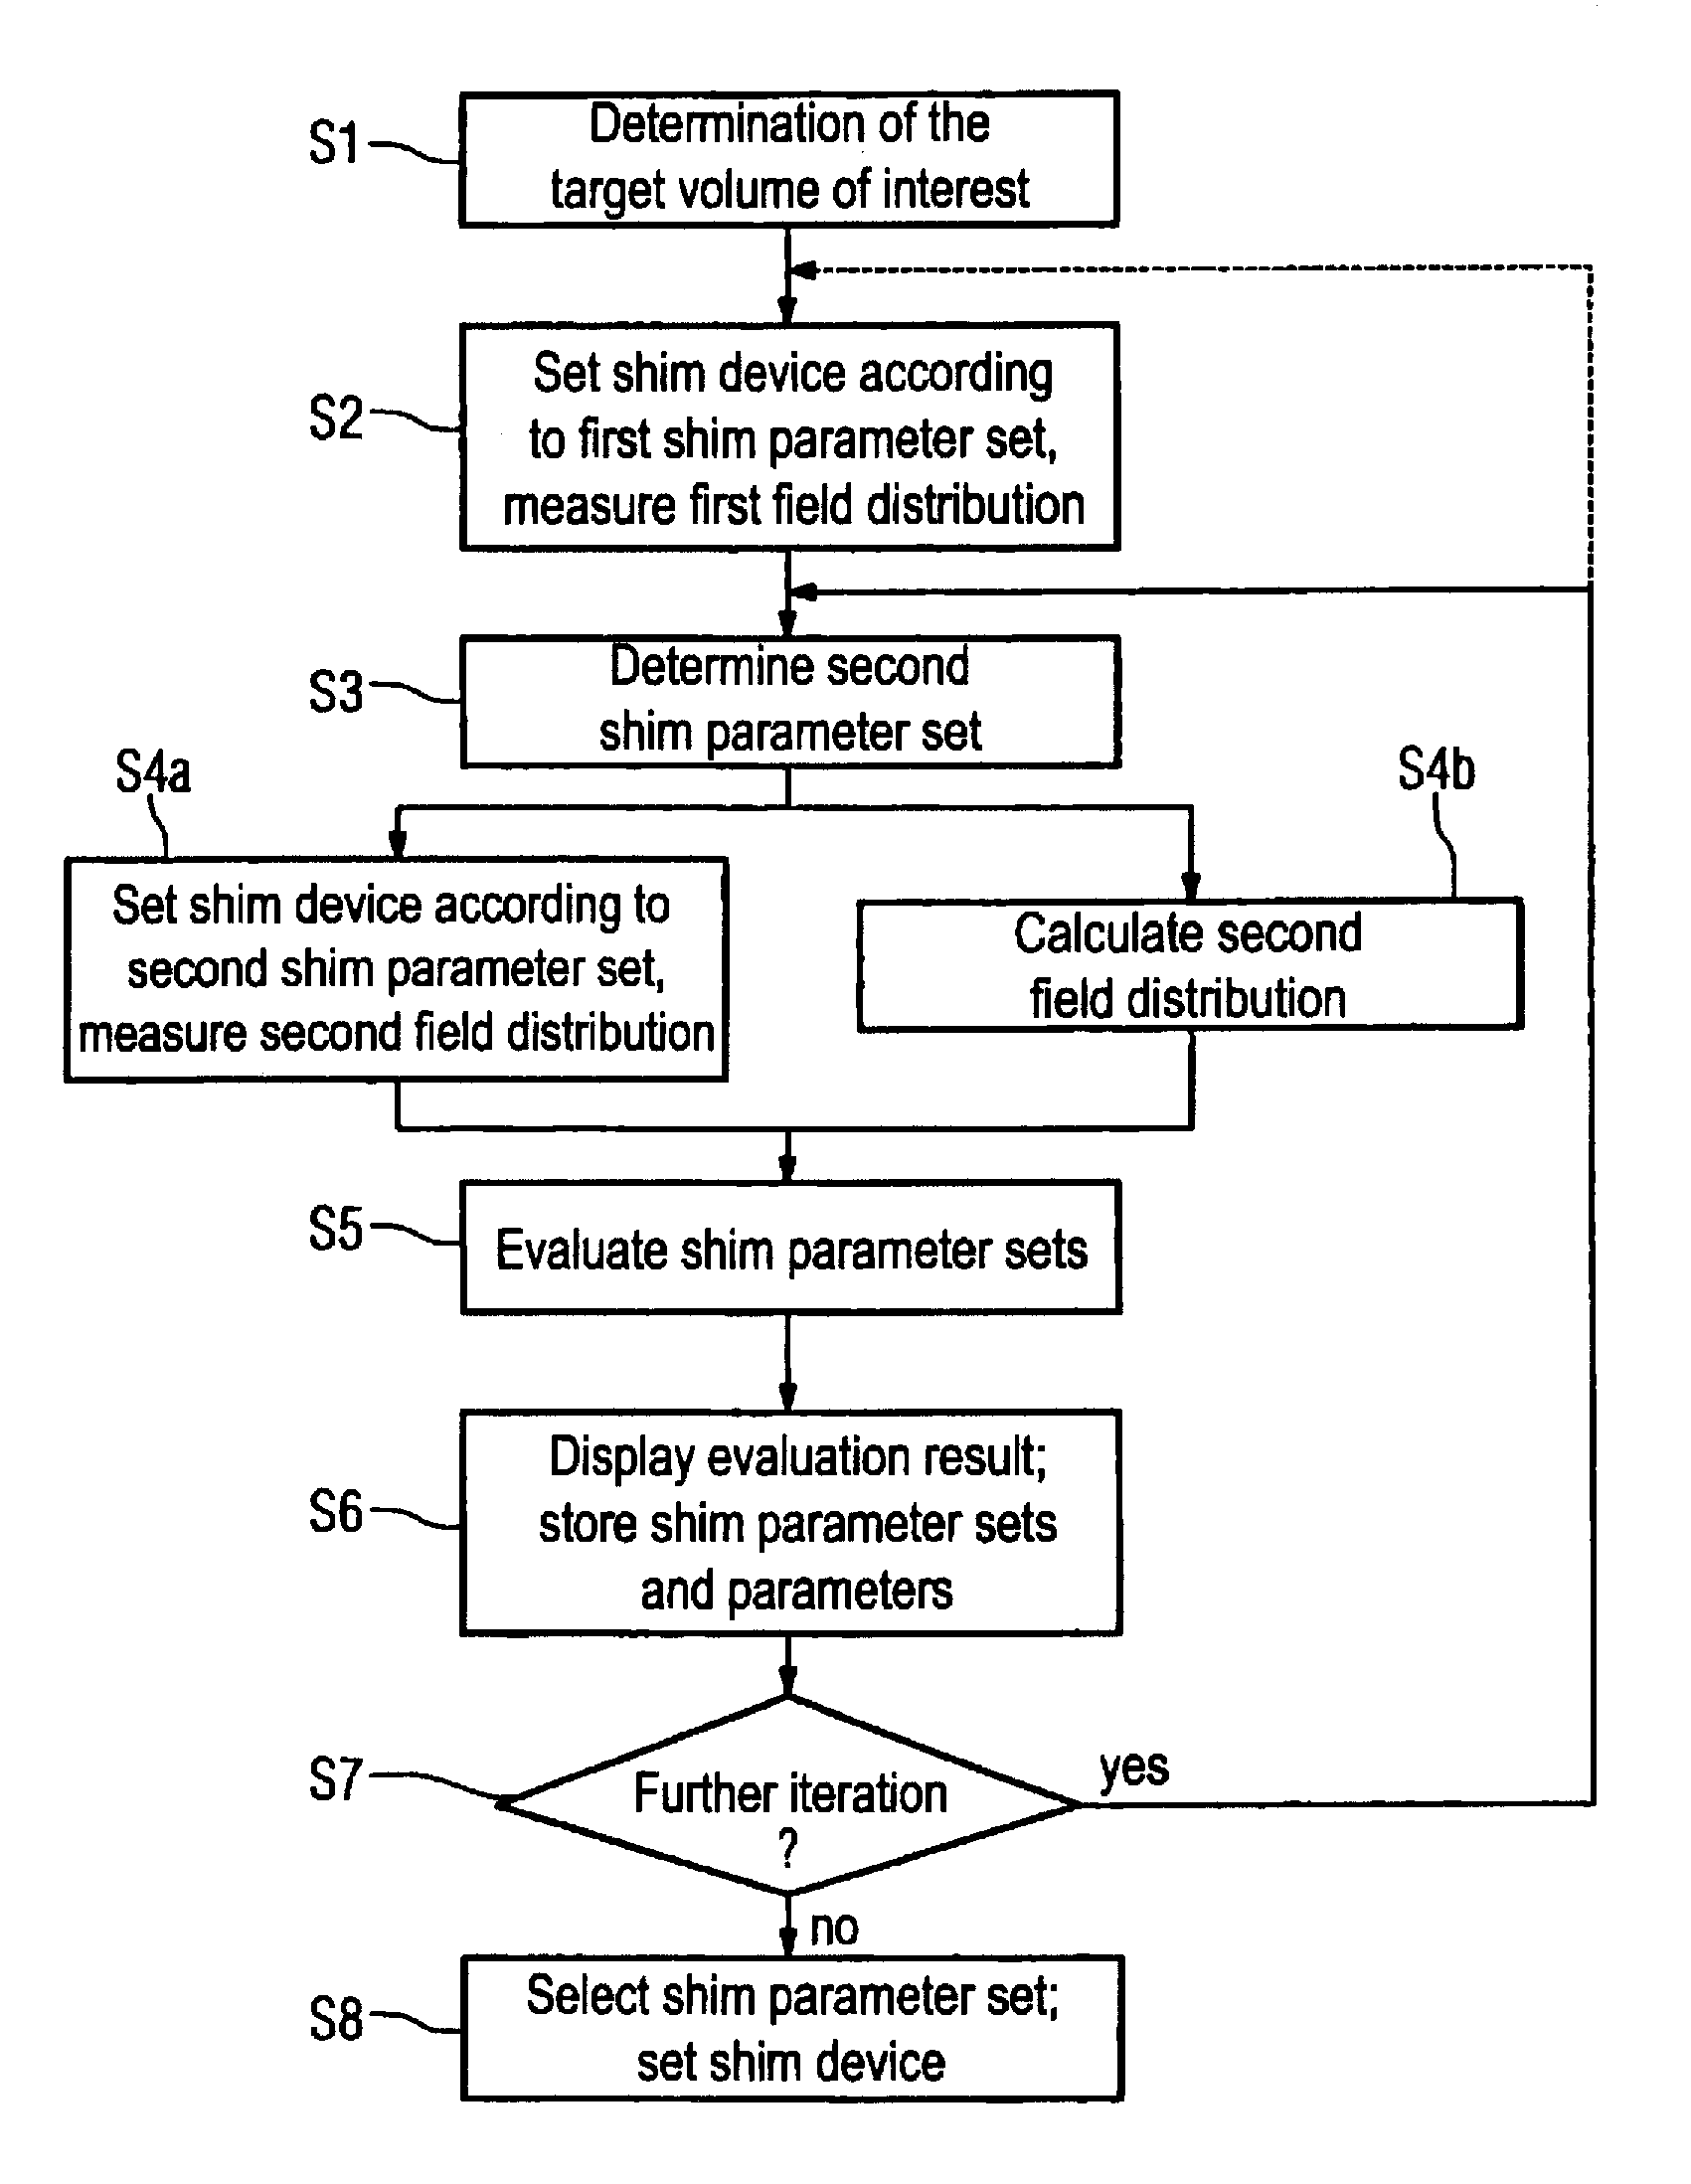 Method for determination and evaluation of a shim parameter set for controlling a shim device in a magnetic resonance apparatus